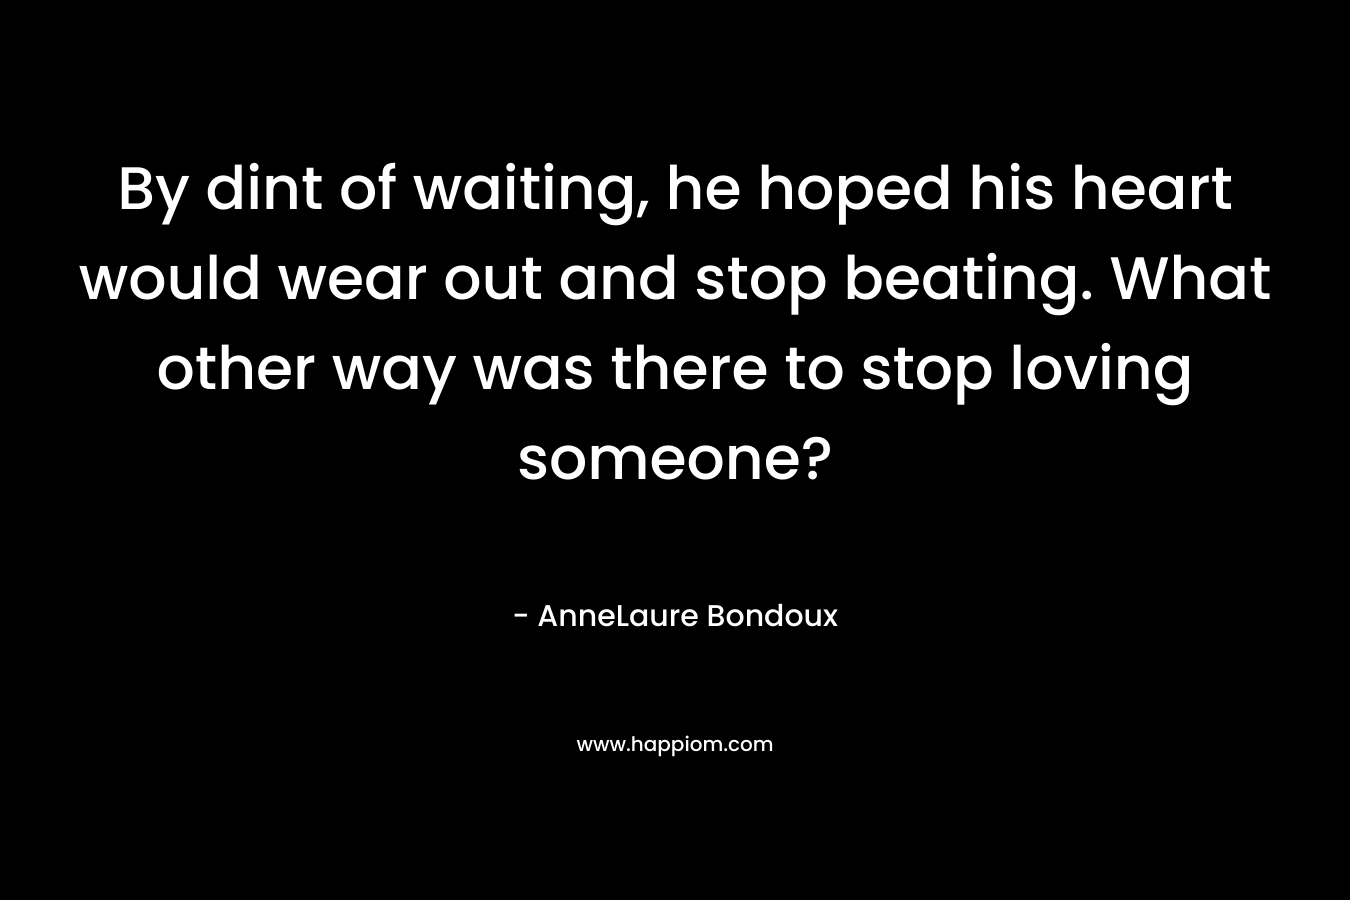 By dint of waiting, he hoped his heart would wear out and stop beating. What other way was there to stop loving someone?